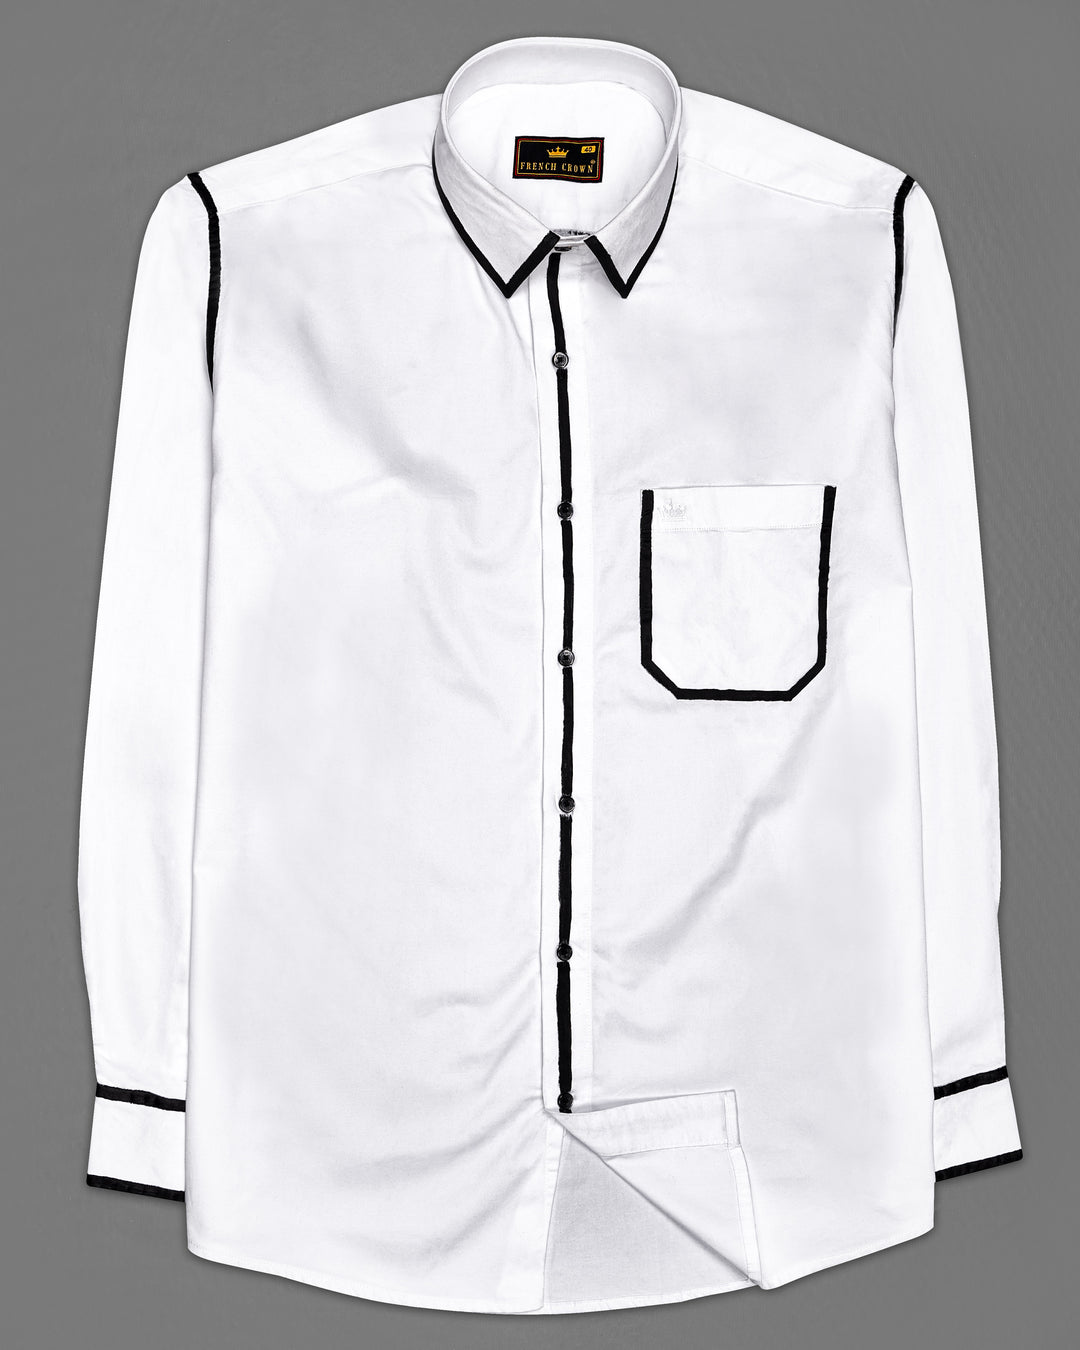 French Crown Bright White Embellished with Black Hand Casual Prints Premium Cotton Shirt For Men, 44 / XL / Full Sleeves